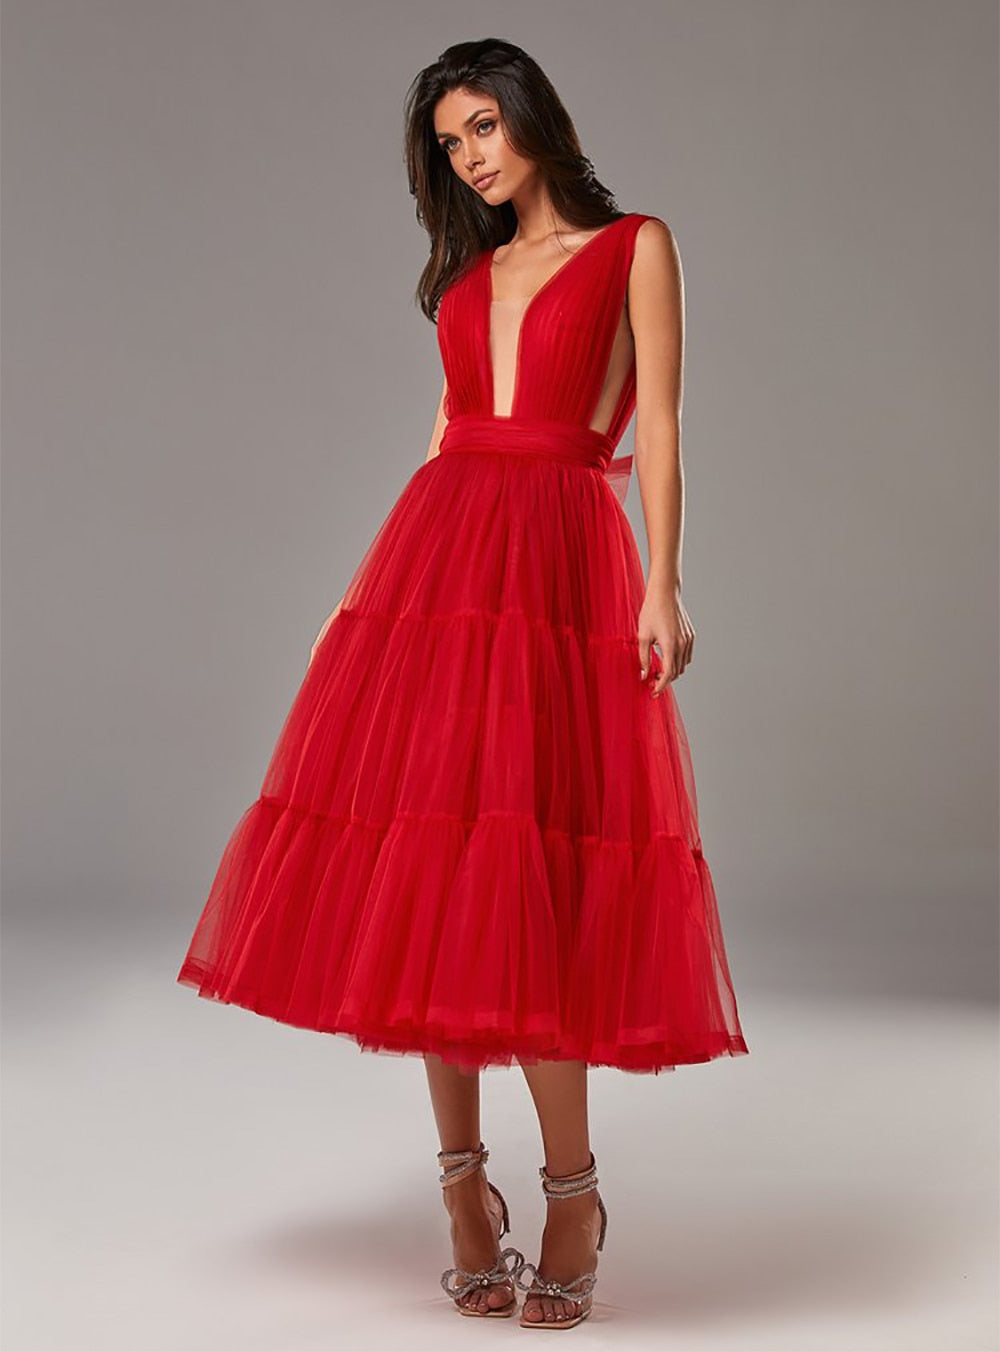 Cinessd  Sexy Deep V-Neck Prom Dresses Sleeveless Tiered Skirt A-Line Evening Gown Pleated Tea-Length Tulle Party Gowns